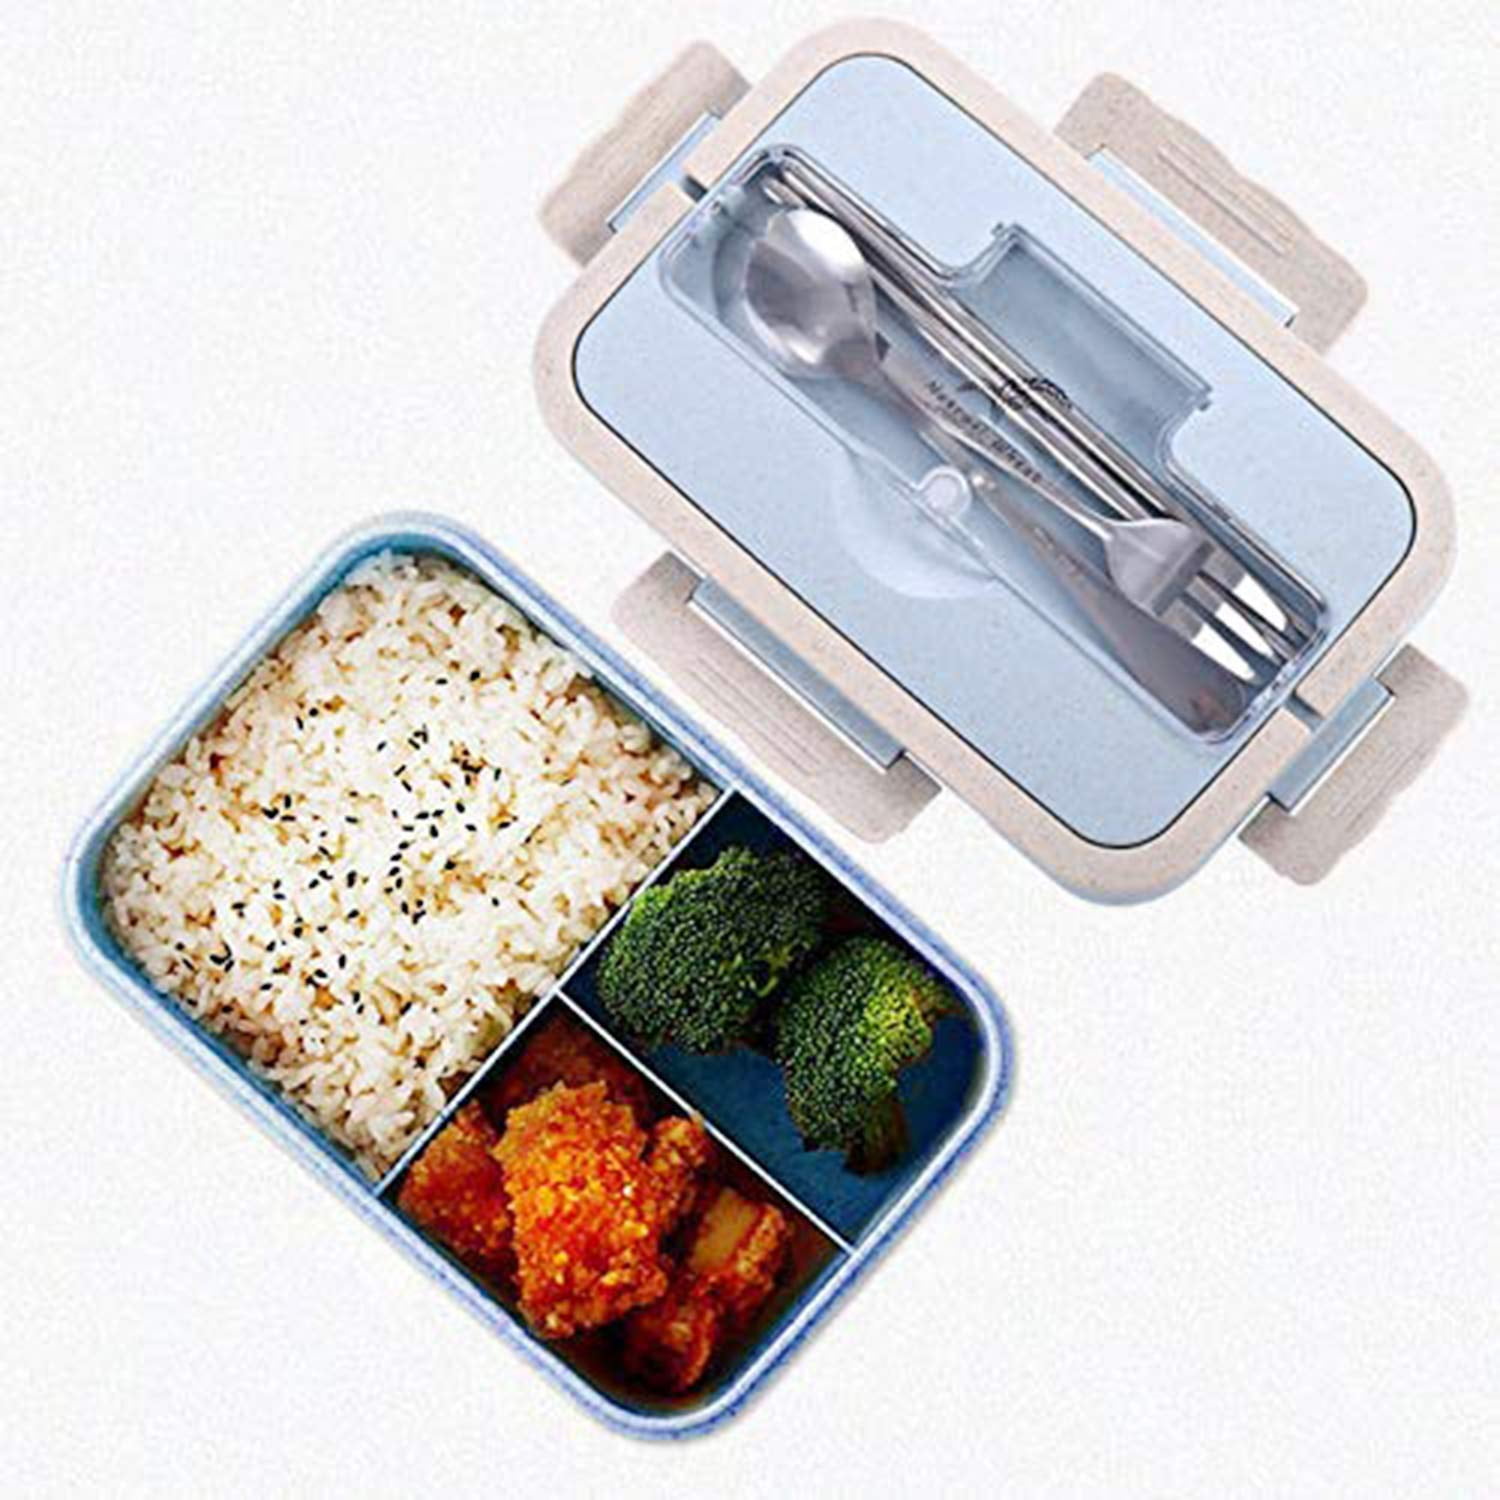 Pack of 3 for Lunch BPA Free Dishwasher Safe CoaGu Canisters Sets for The Kitchen 18/8 Stainless Steel Lunch Containers Bento Box 